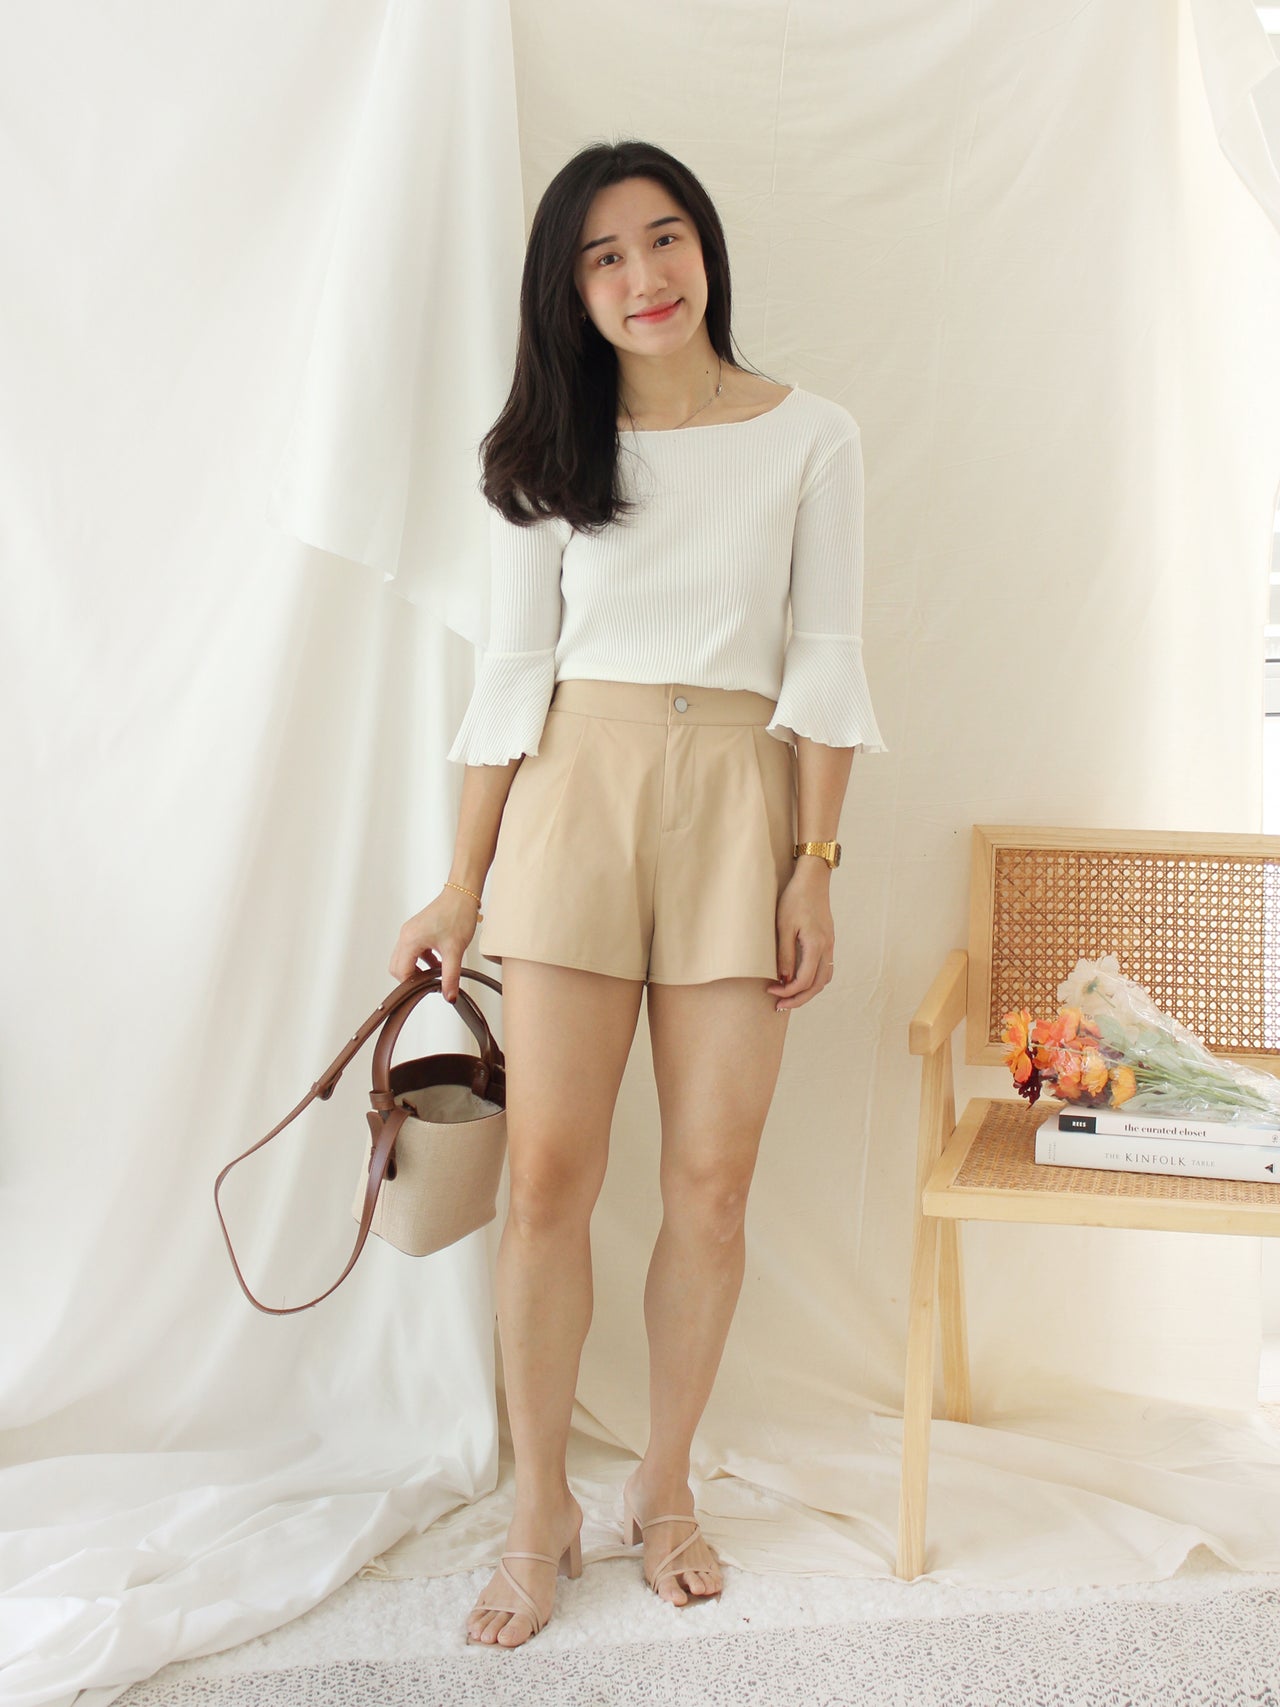 Quarter Flare Sleeve Top - LovelyMadness Clothing Malaysia